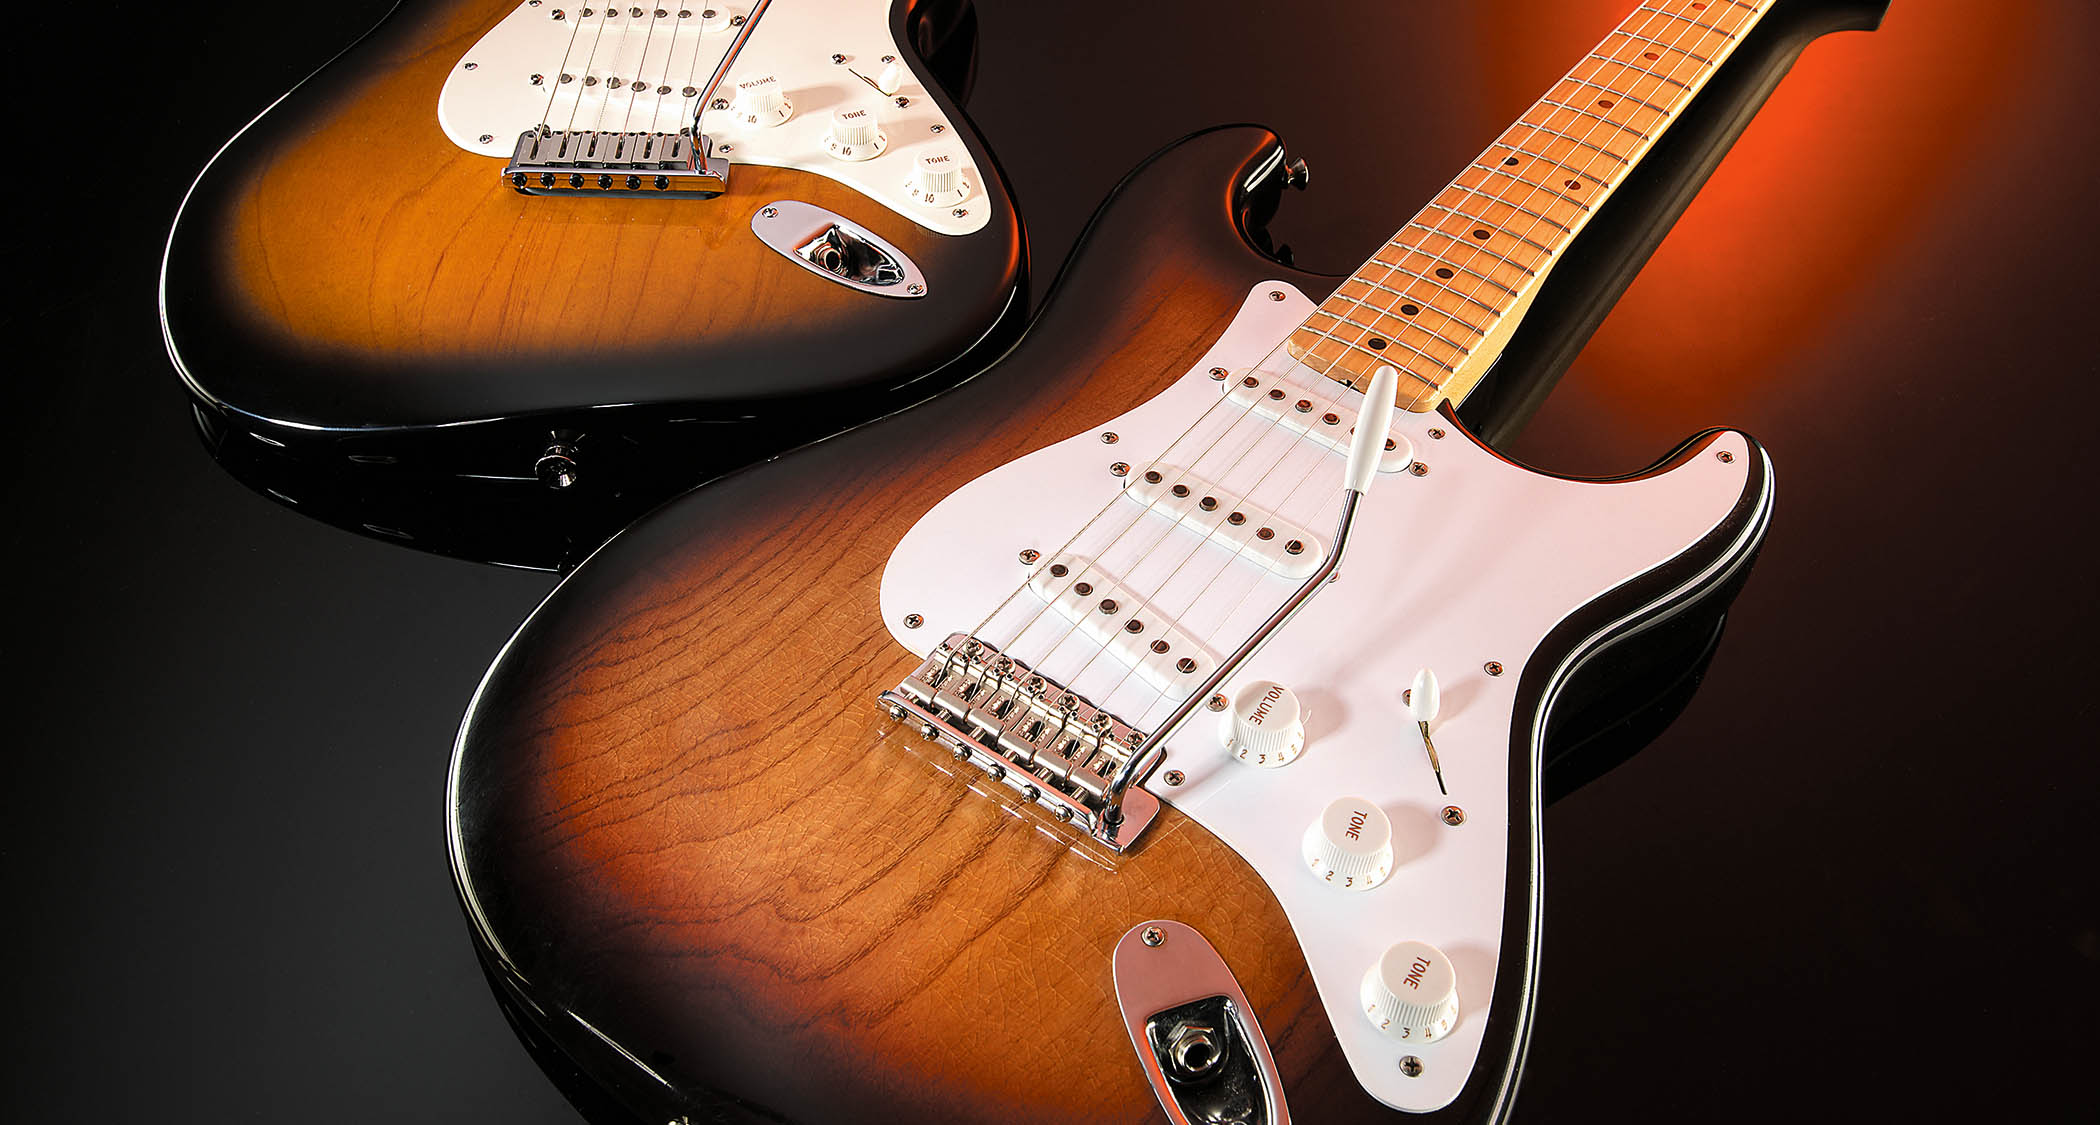 How the Fender Stratocaster ushered in an evolution in guitar design – and a revolution in guitar music